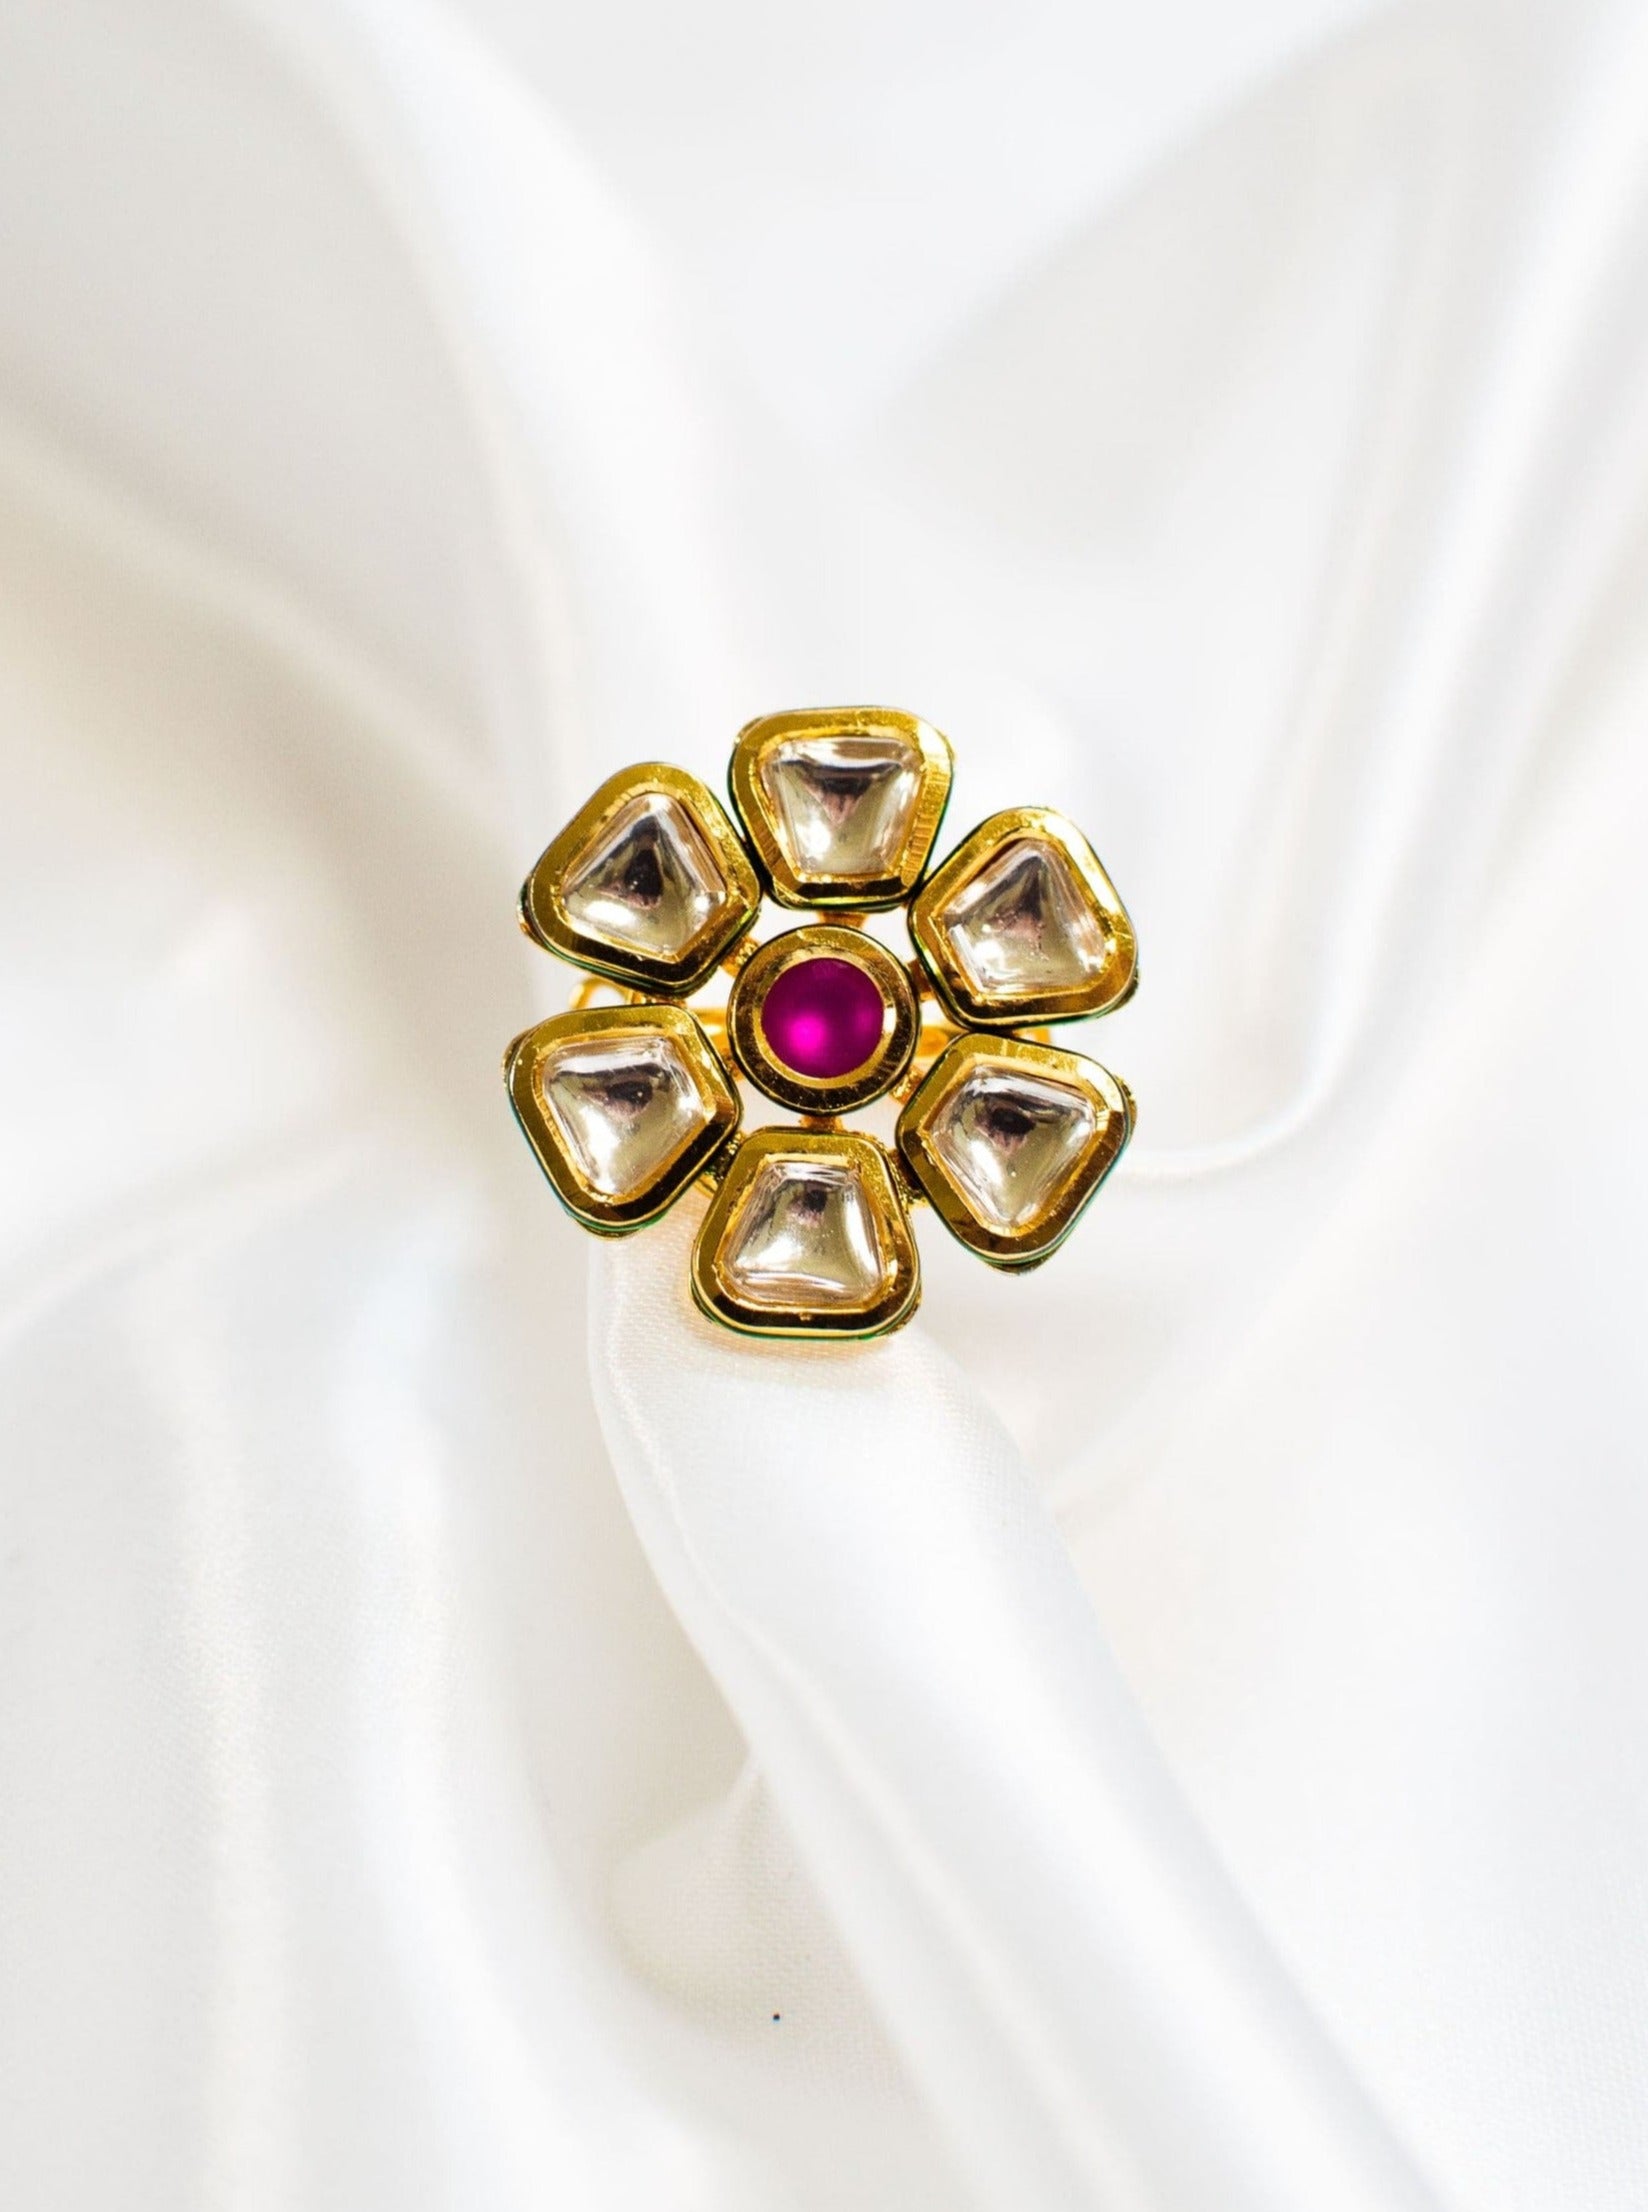 Classic & Minimal jewelry for modern women - Gold finger ring with pink onyx & Kundan